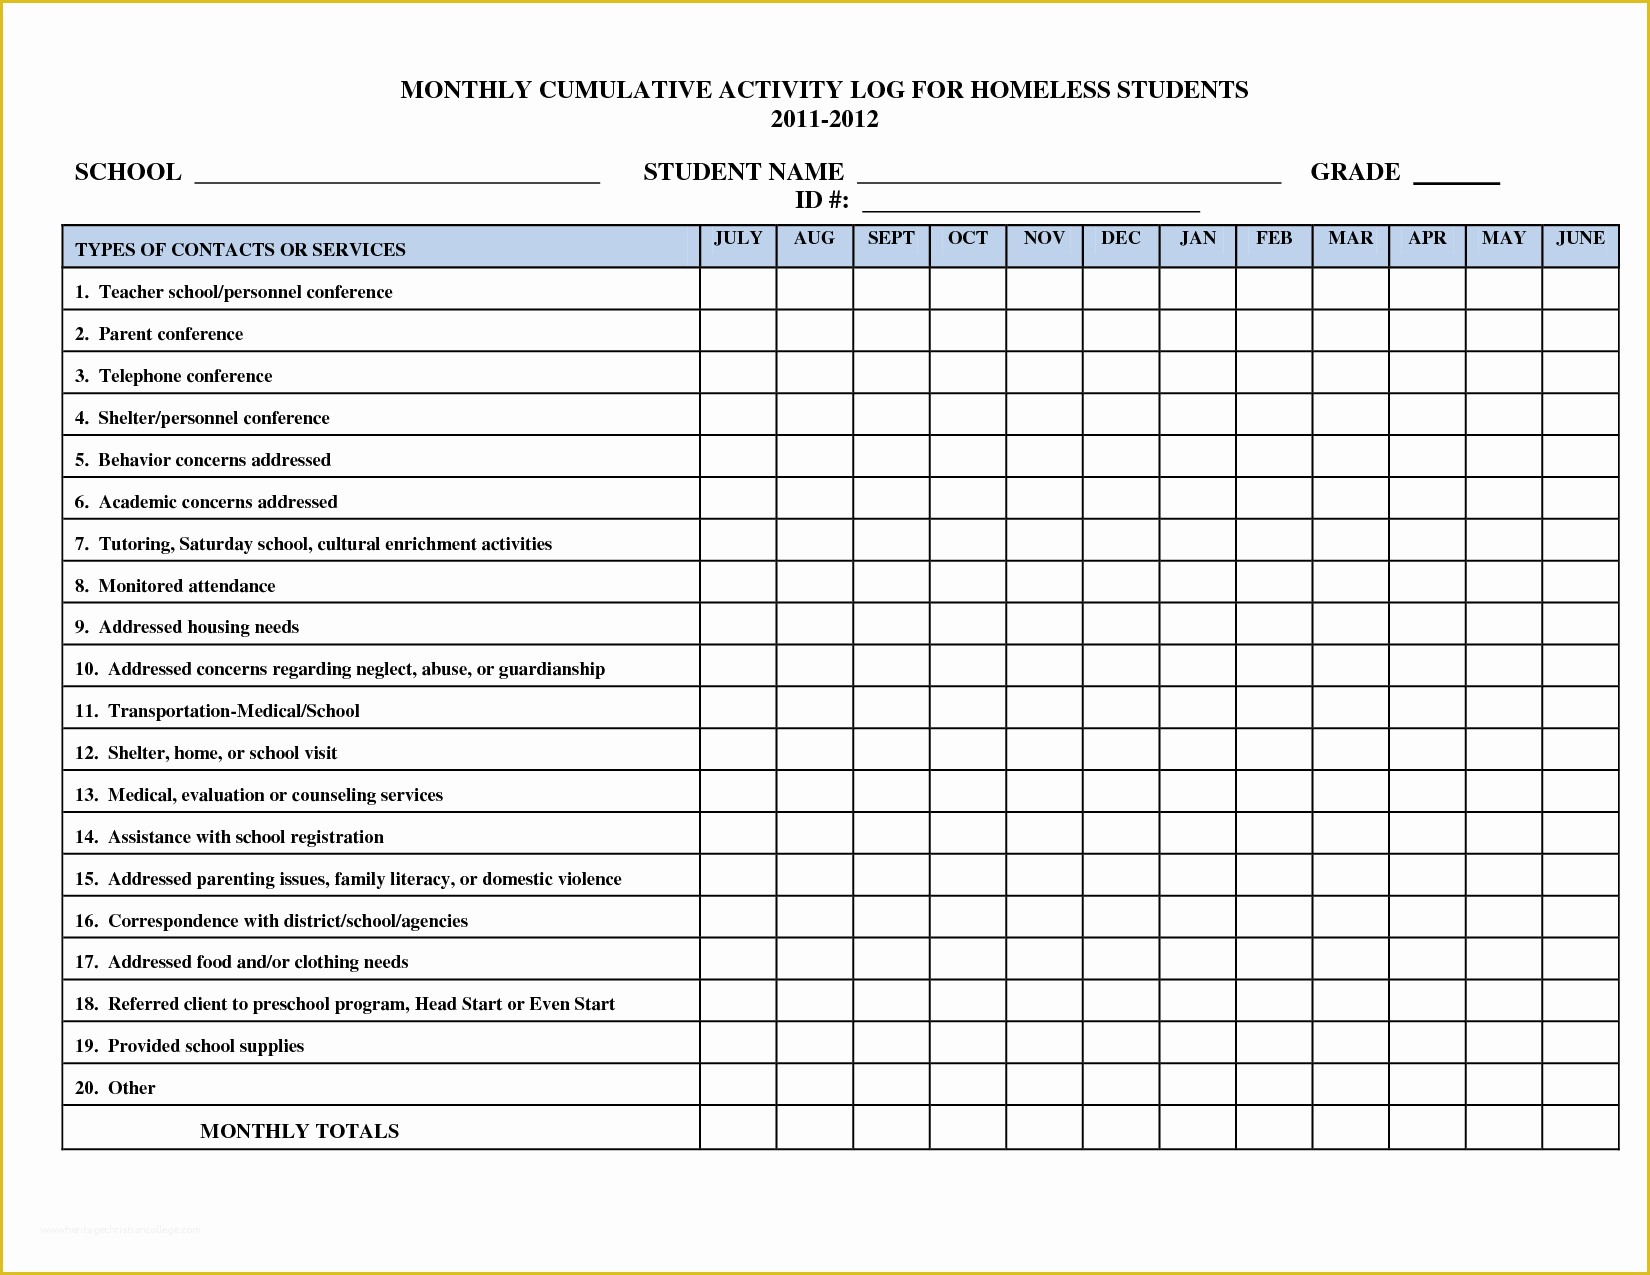 Free Daily Activity Log Template Of Related Keywords &amp; Suggestions for Monthly Activity Log